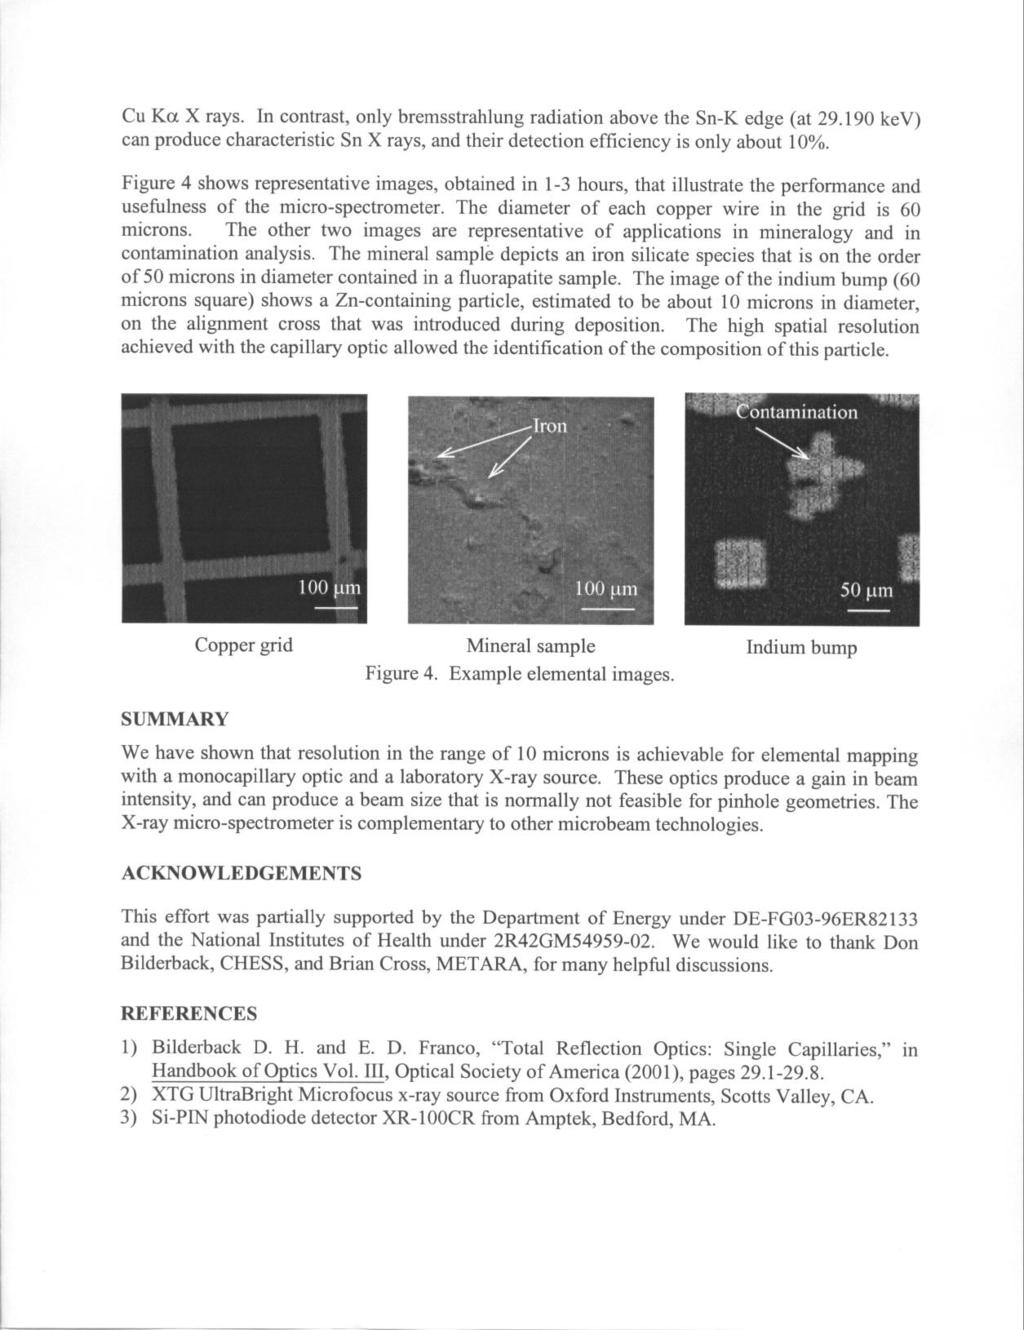 Copyright(c)JCPDS-International Centre for Diffraction Data 2001,Advances in X-ray Analysis,Vol.44 328 Cu Ka X rays. In contrast, only bremsstrahlung radiation above the Sn-K edge (at 29.